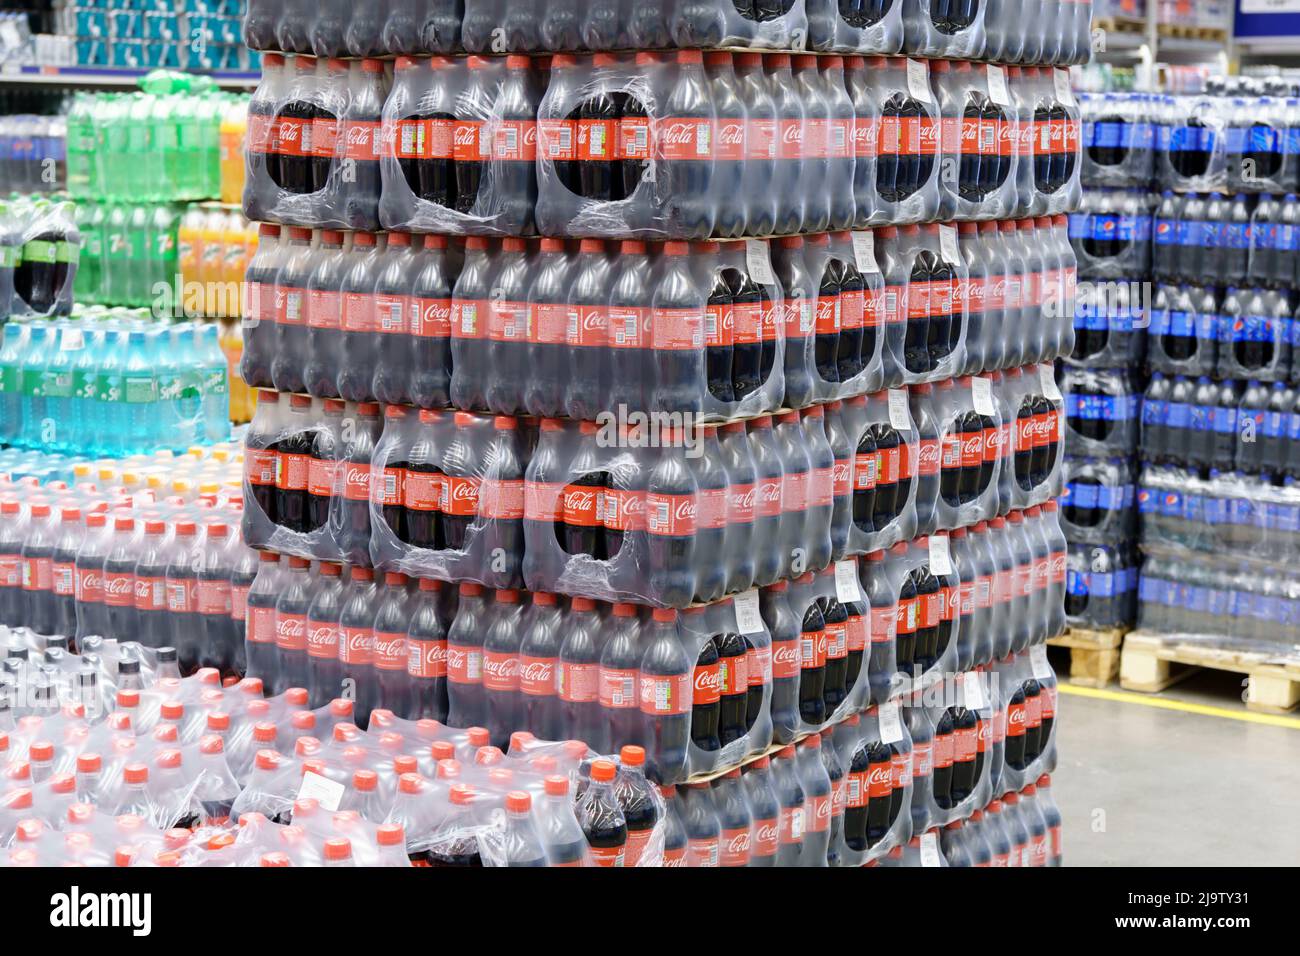 Tyumen, Russia-May 11, 2022: Coca Cola brand soft drink on display for sell at a supermarket. Coca Cola is a famous soft drink maker. Stock Photo